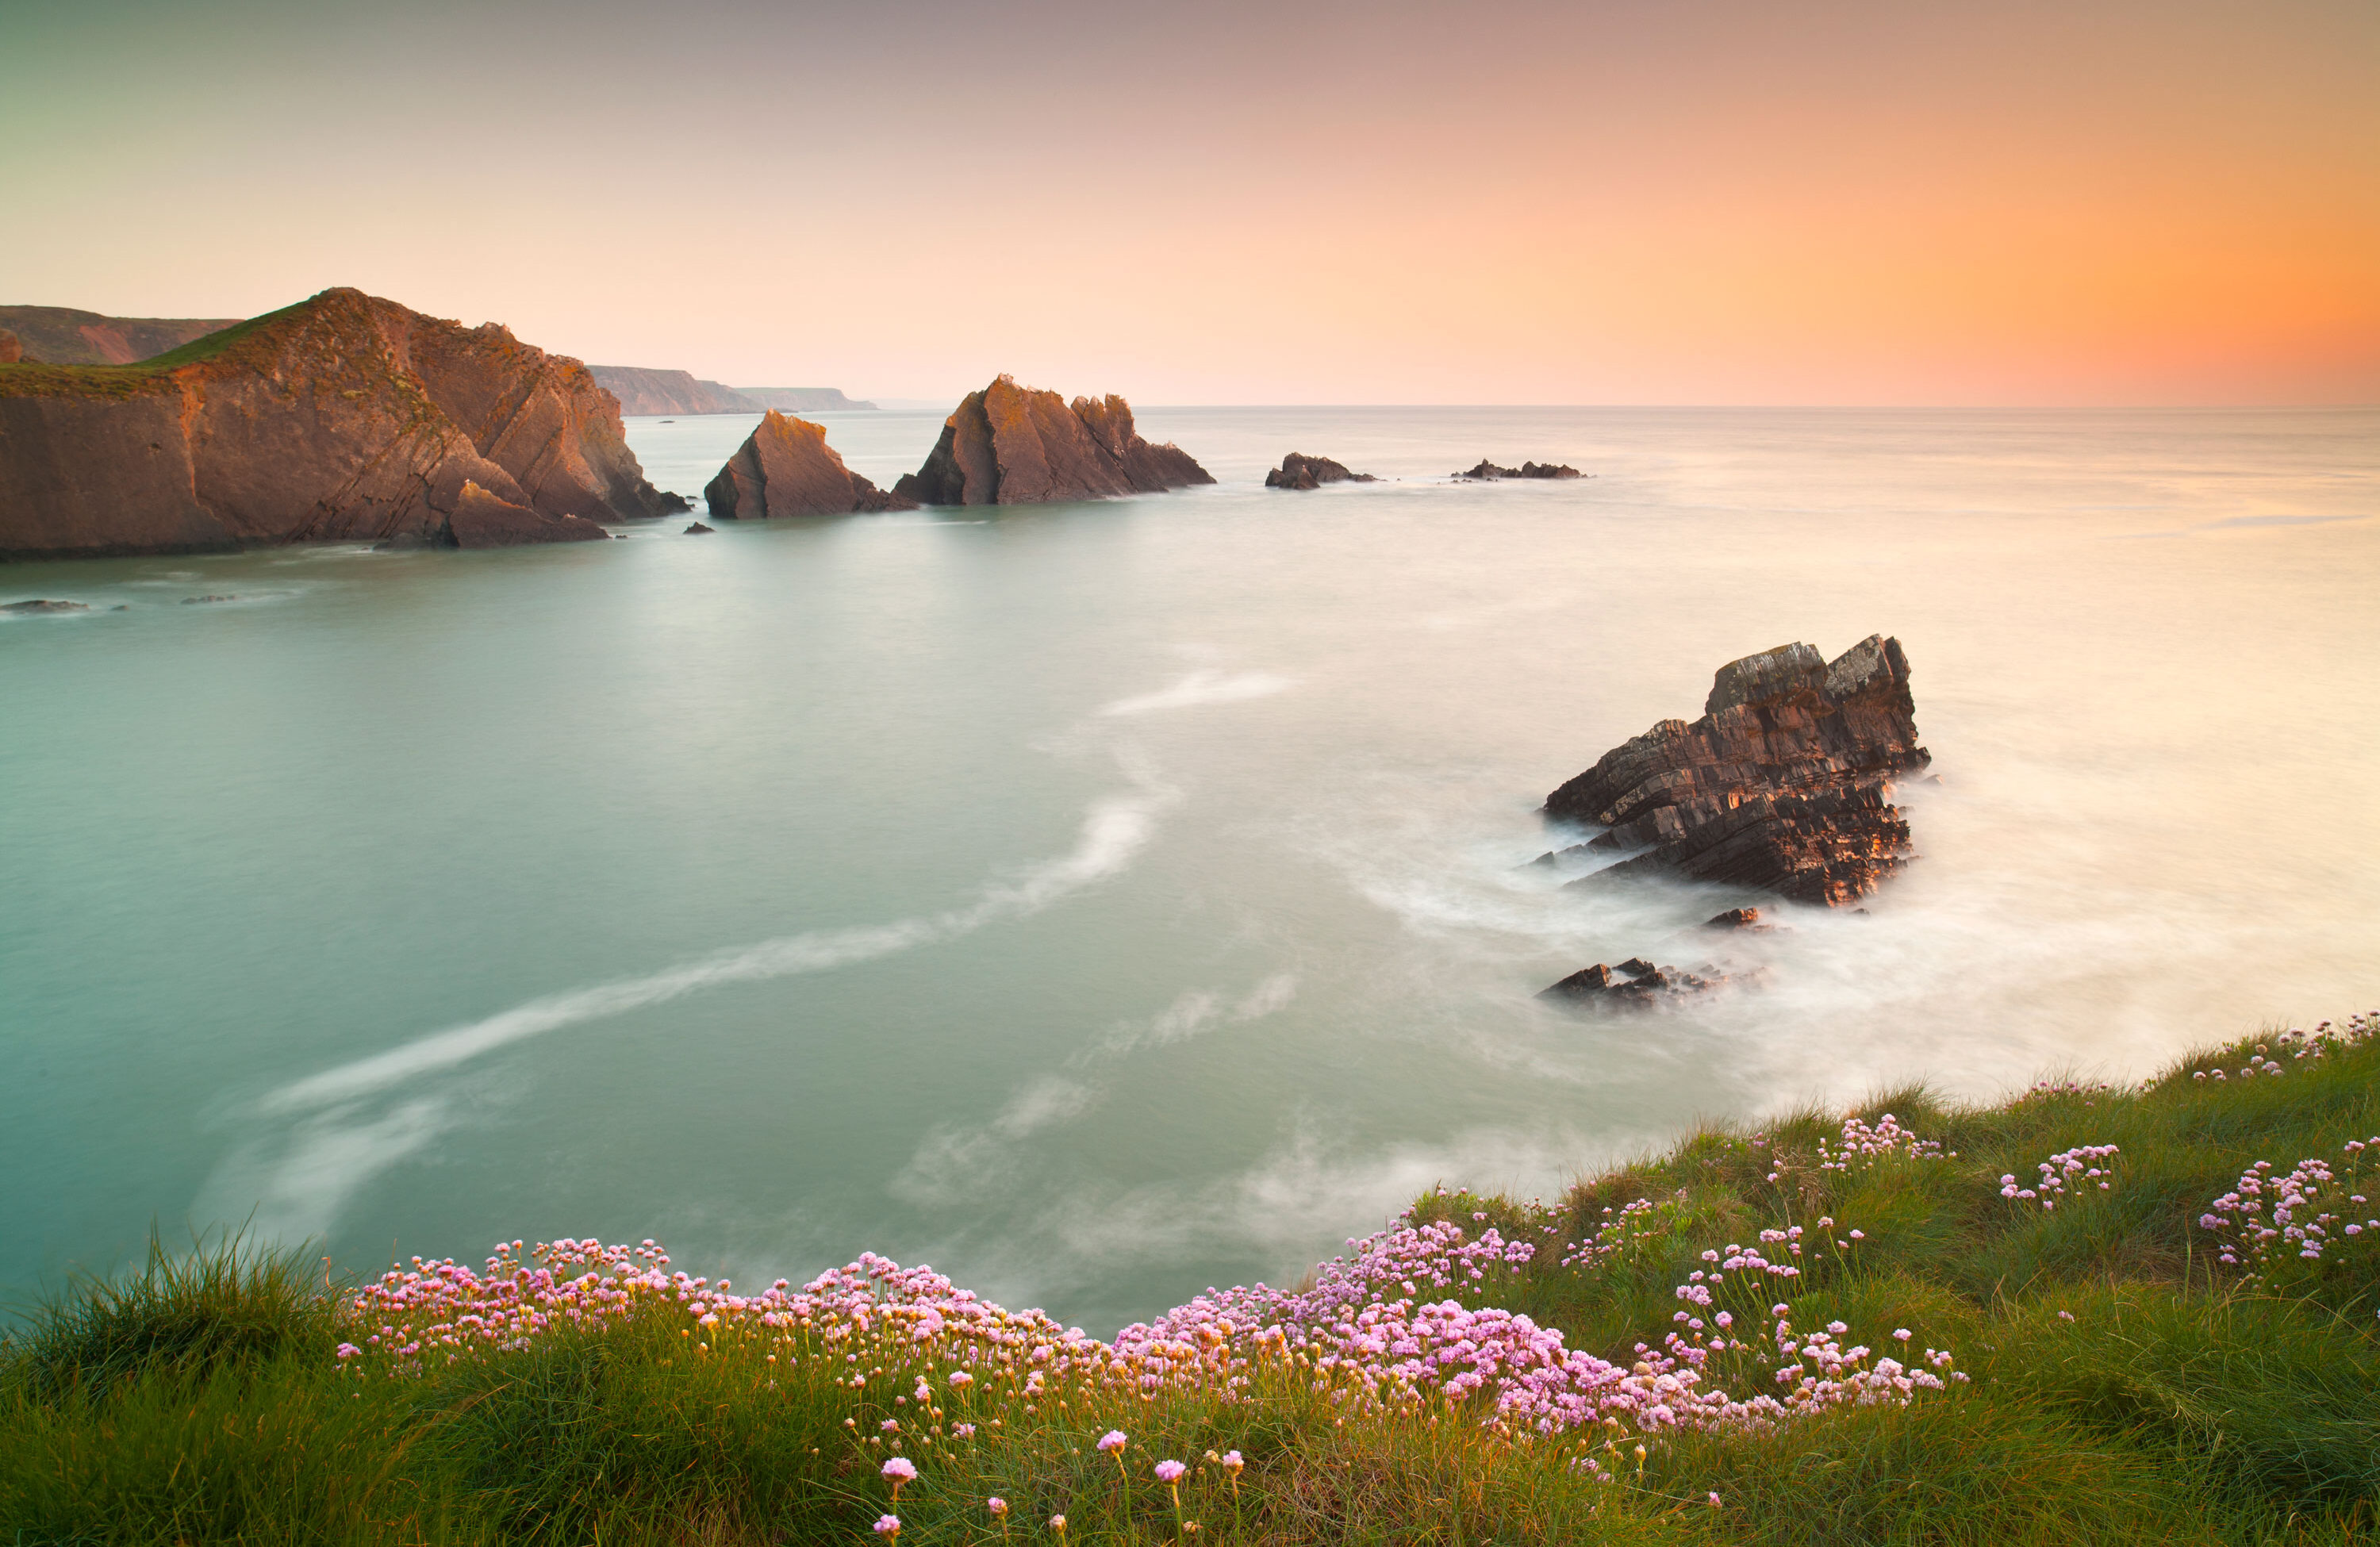 Hartland Quay with a view of the sea and cliffs at sunset